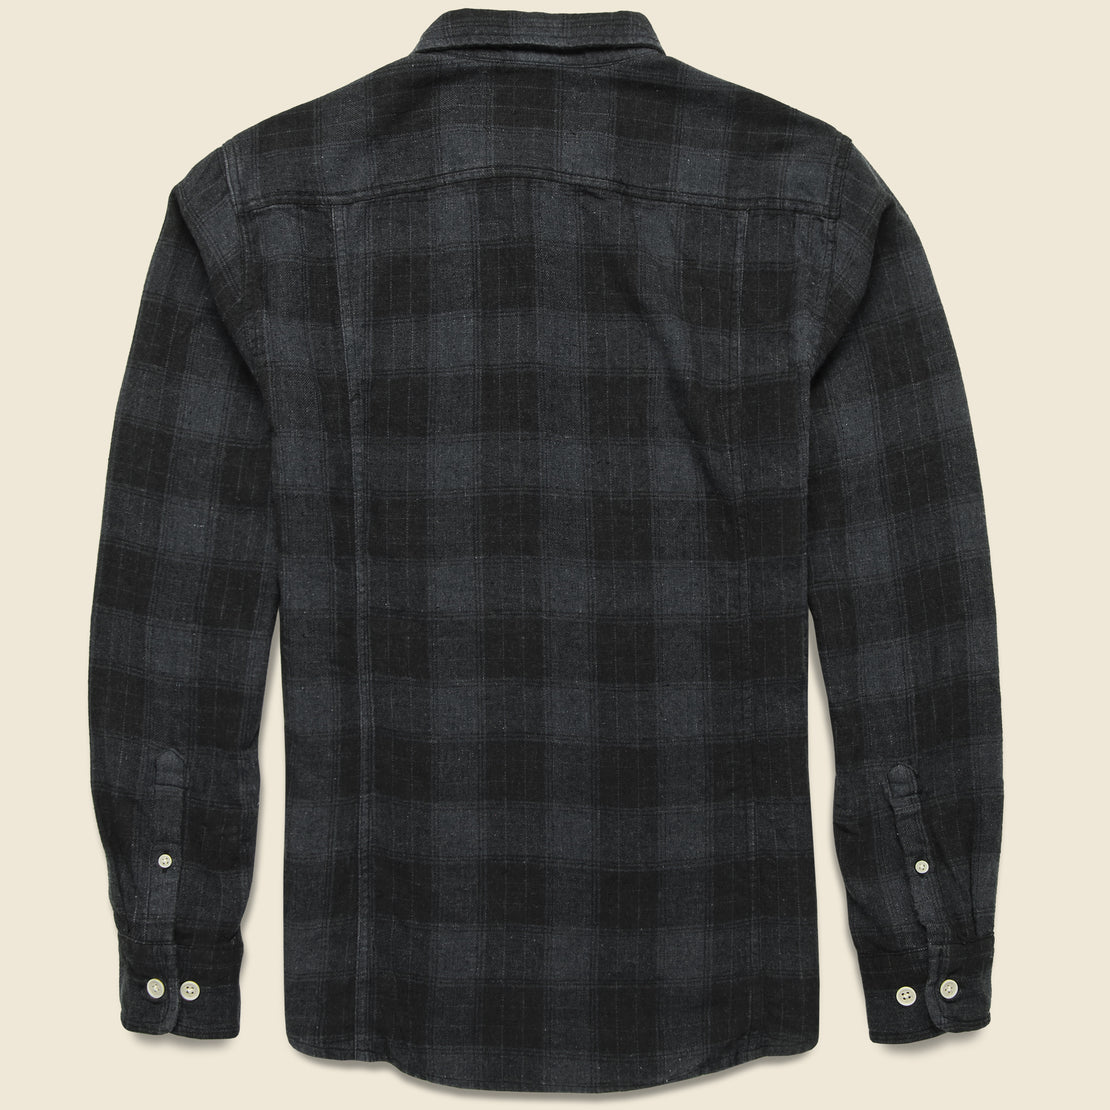 Recycled Plaid Flannel - Black - Corridor - STAG Provisions - Tops - L/S Woven - Plaid